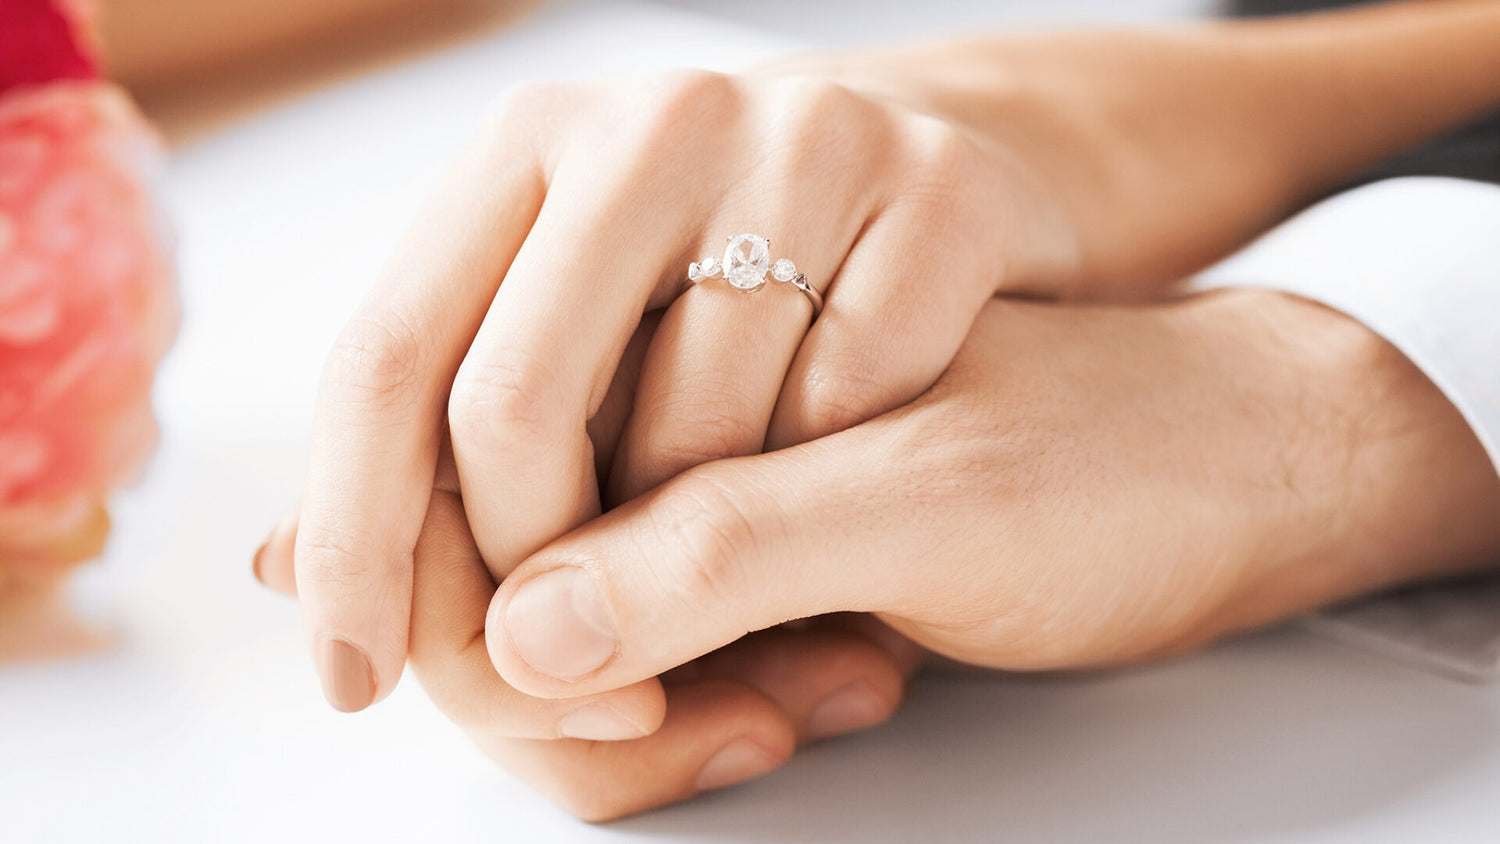 6 THINGS YOU NEED TO KNOW BEFORE BUYING AN ENGAGEMENT RING